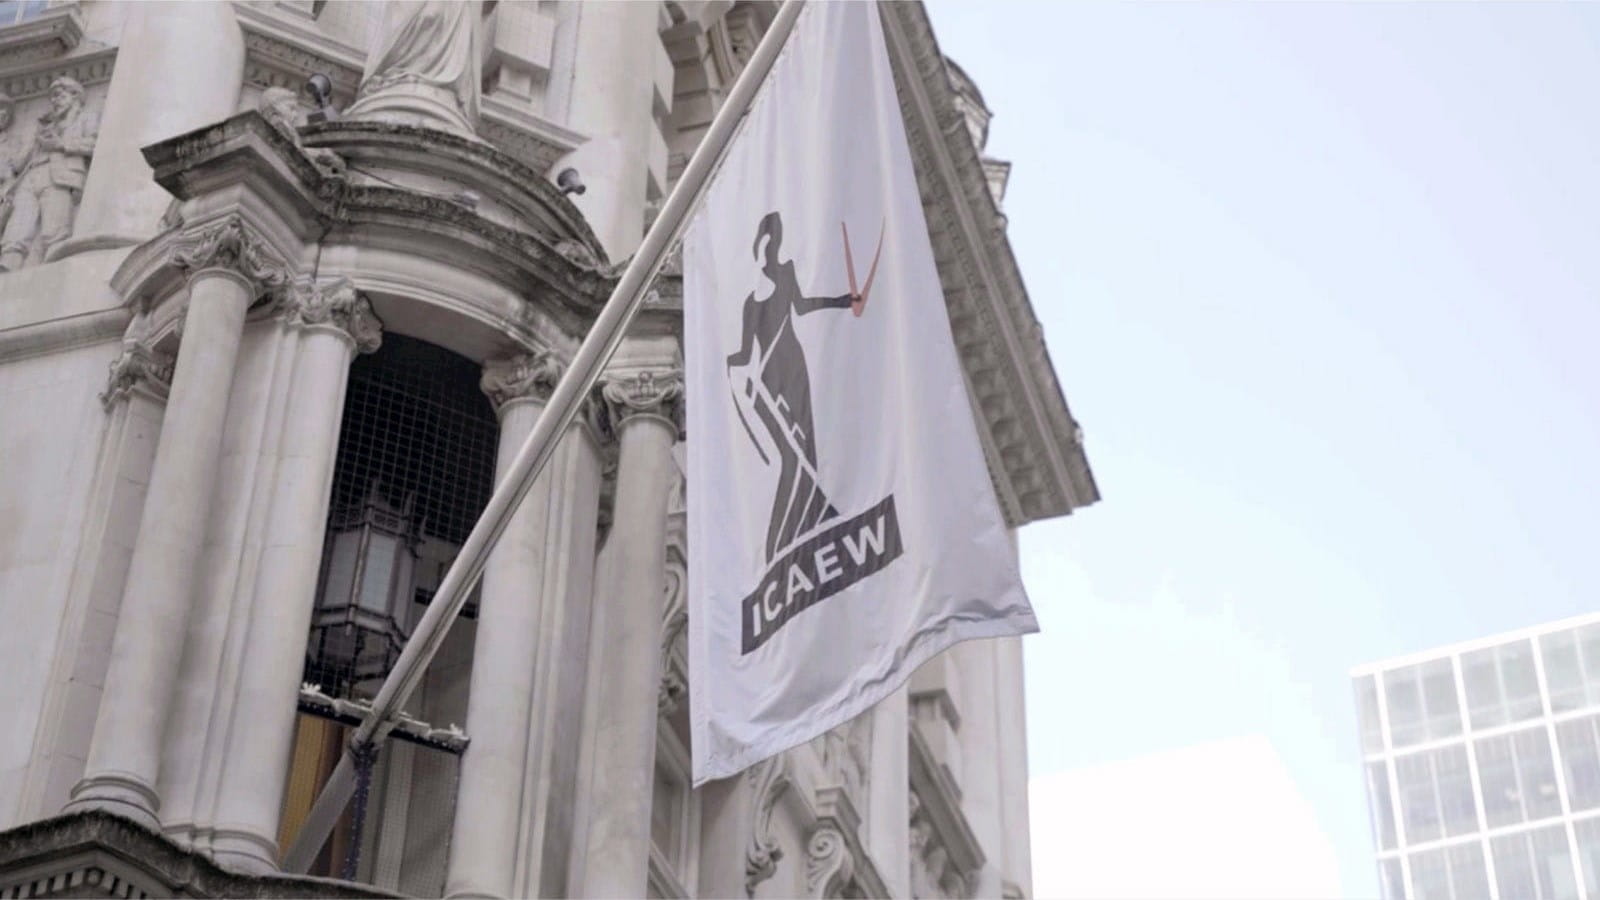 ICAEW flag logo Institute of Chartered Accountants hall London office building